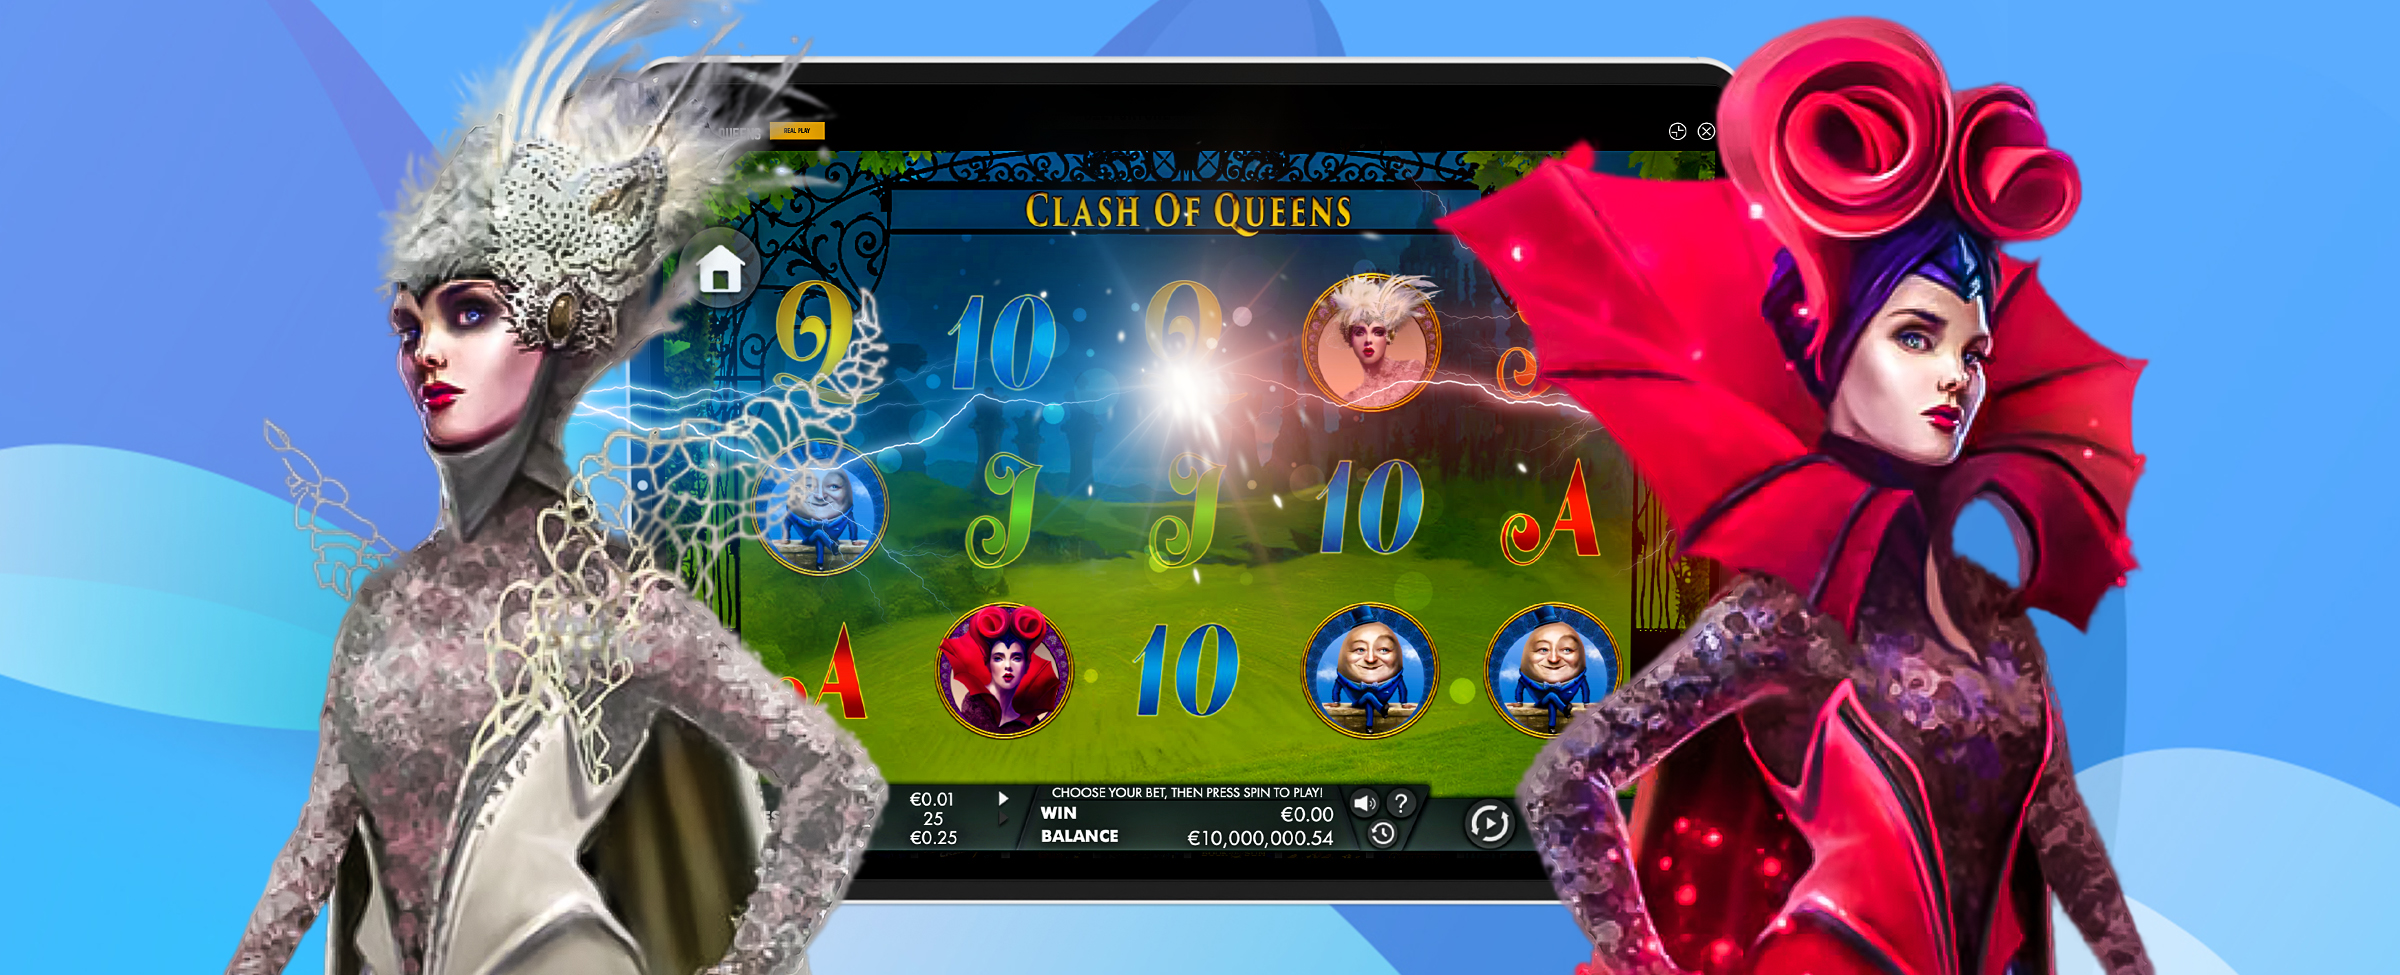 Two animated queens in silver and red, respectively, from the SlotsLV slot game Clash of Queens, flank either side of a tablet device showing a screenshot of the game features.